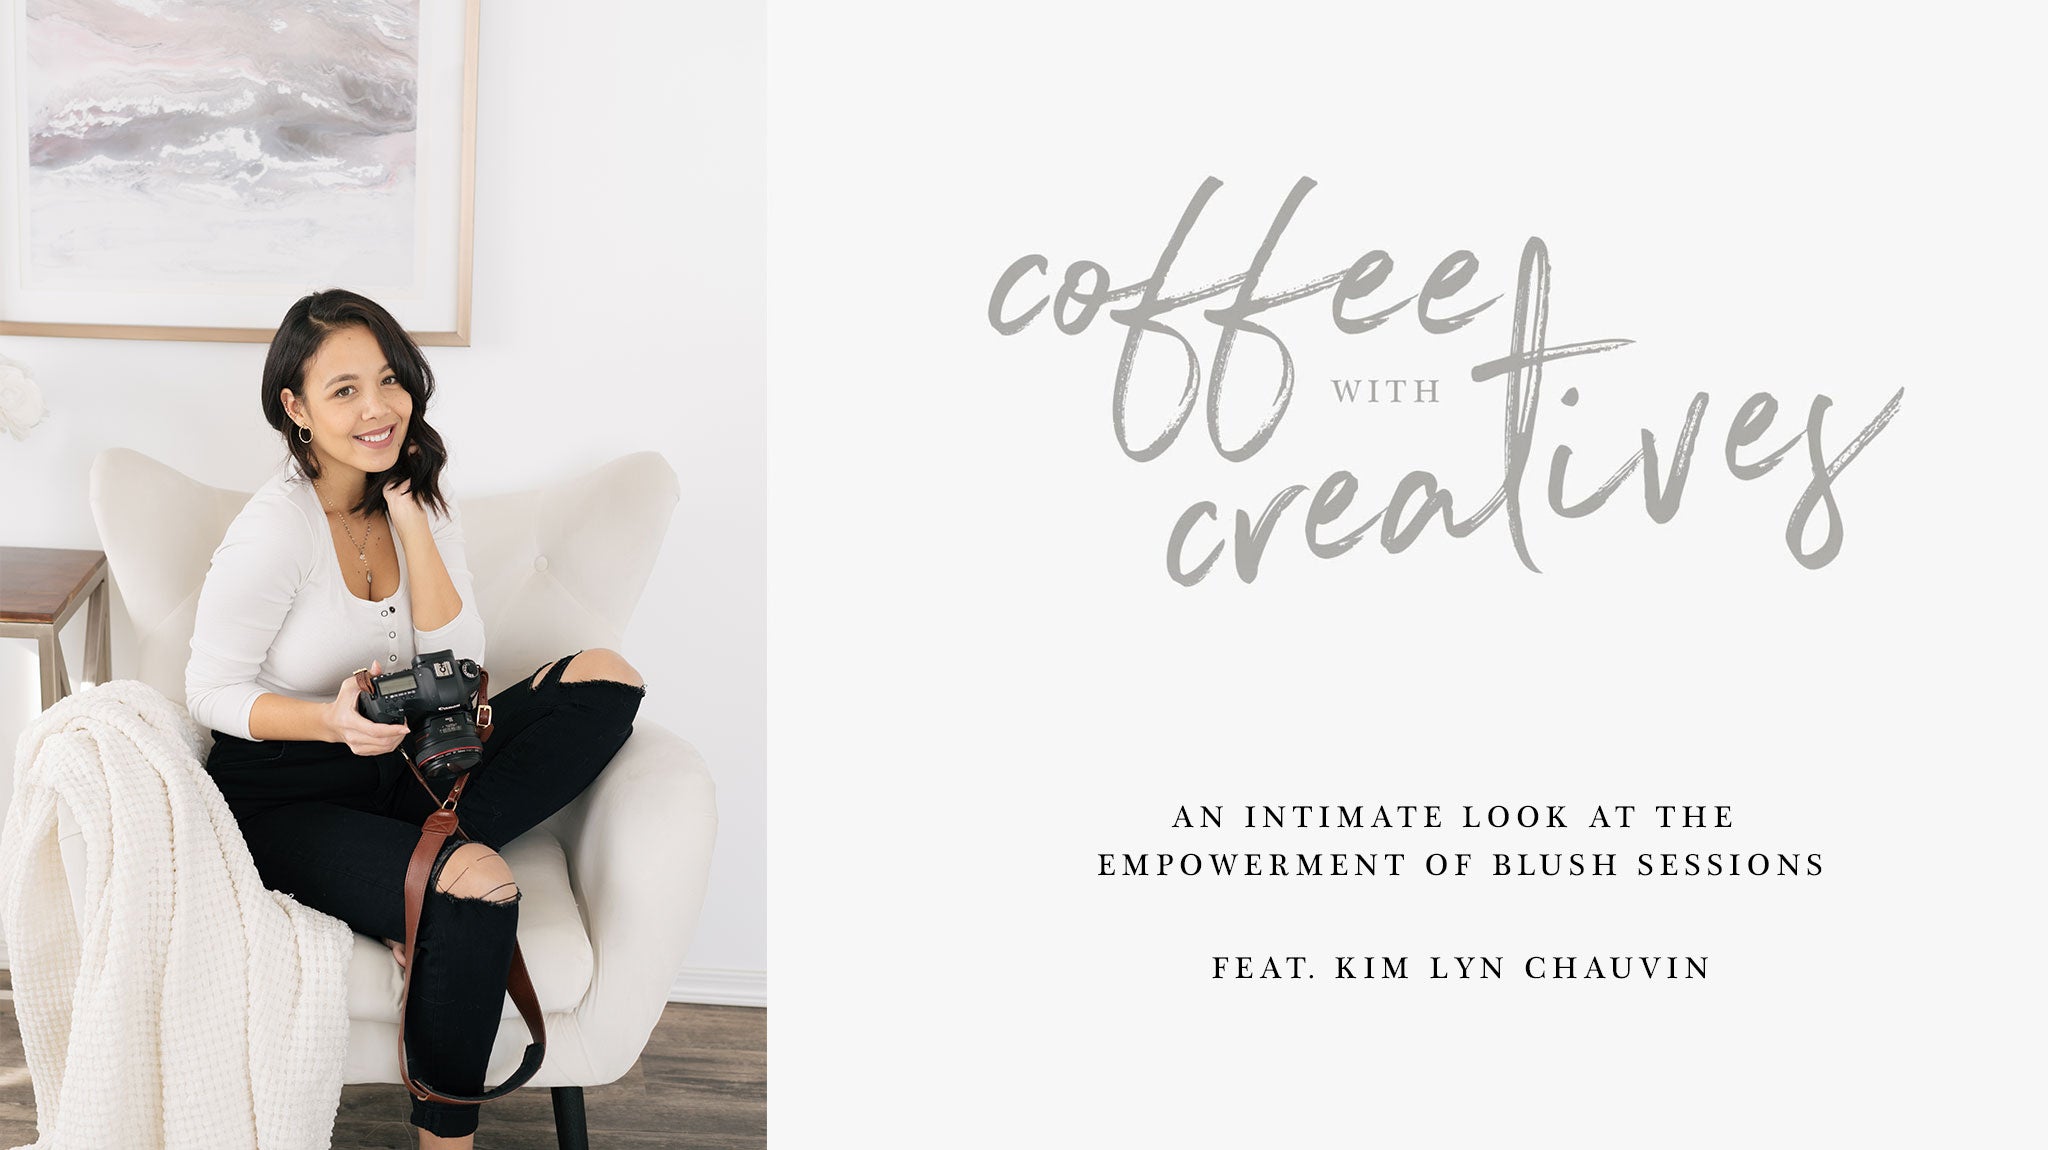 Fotostrap Blog: Kim Lyn Chauvin and Blush Sessions